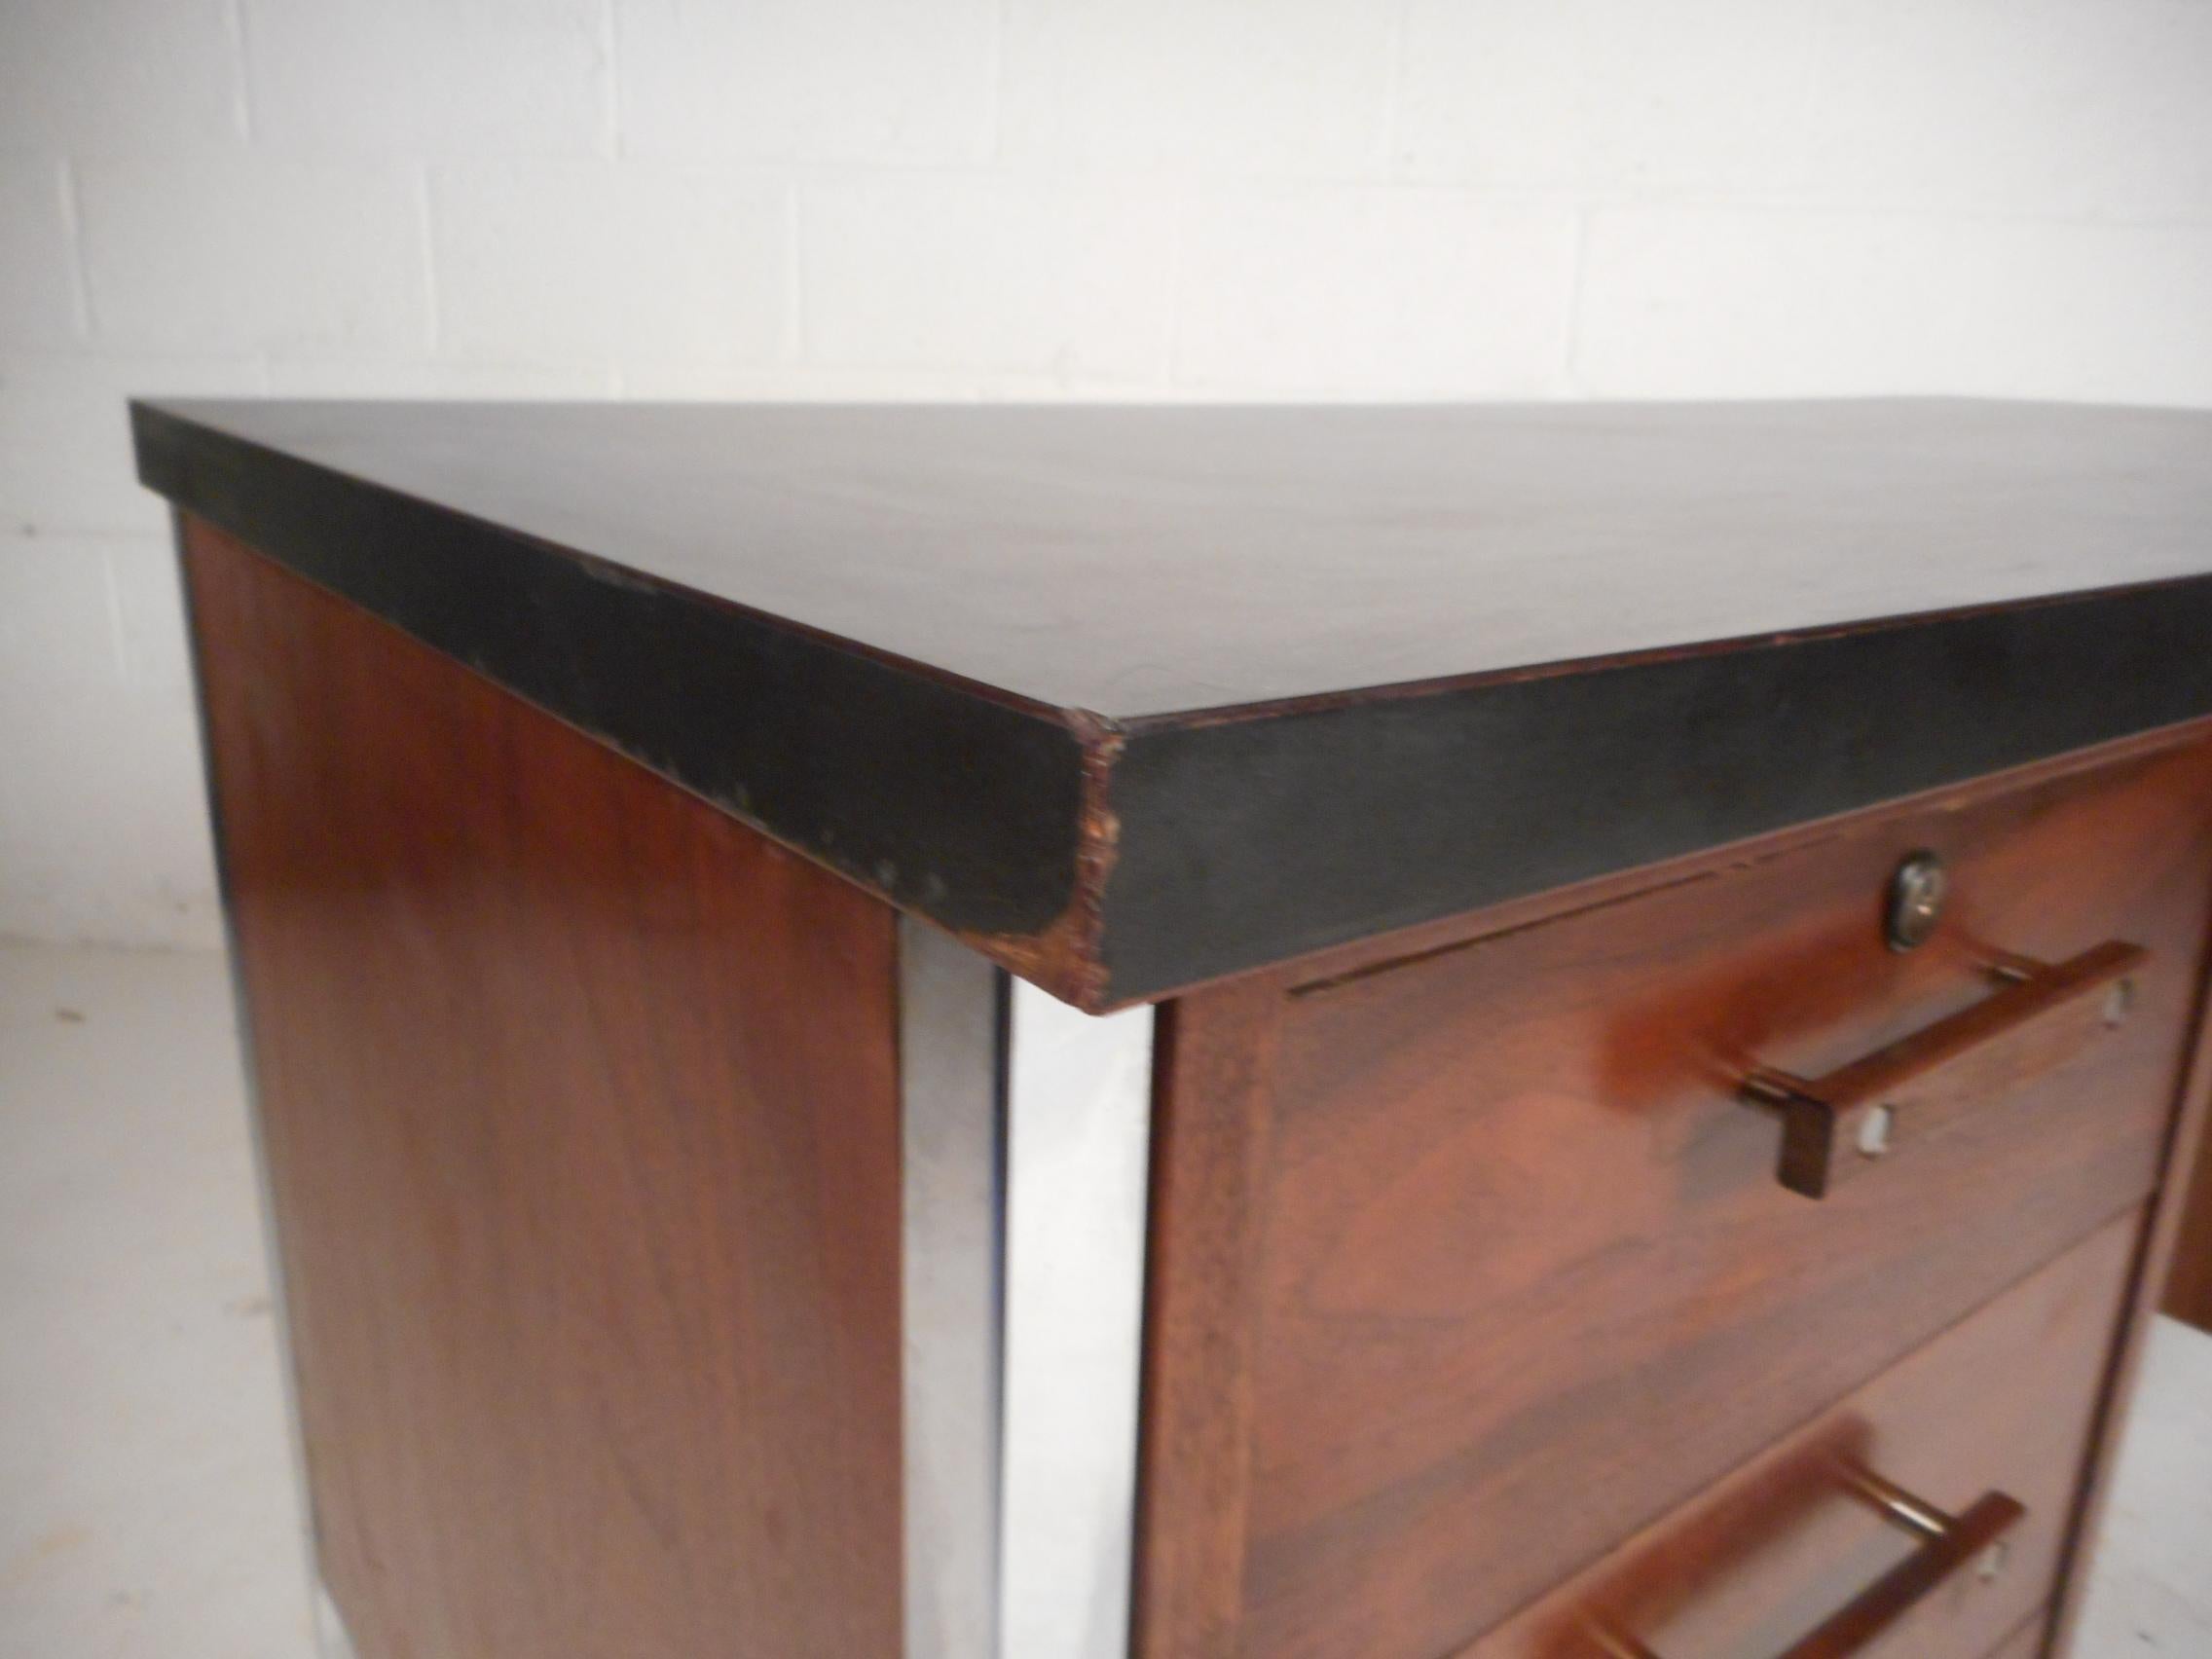 Chrome Mid-Century Modern Desk by Design Craft with a Finished Back